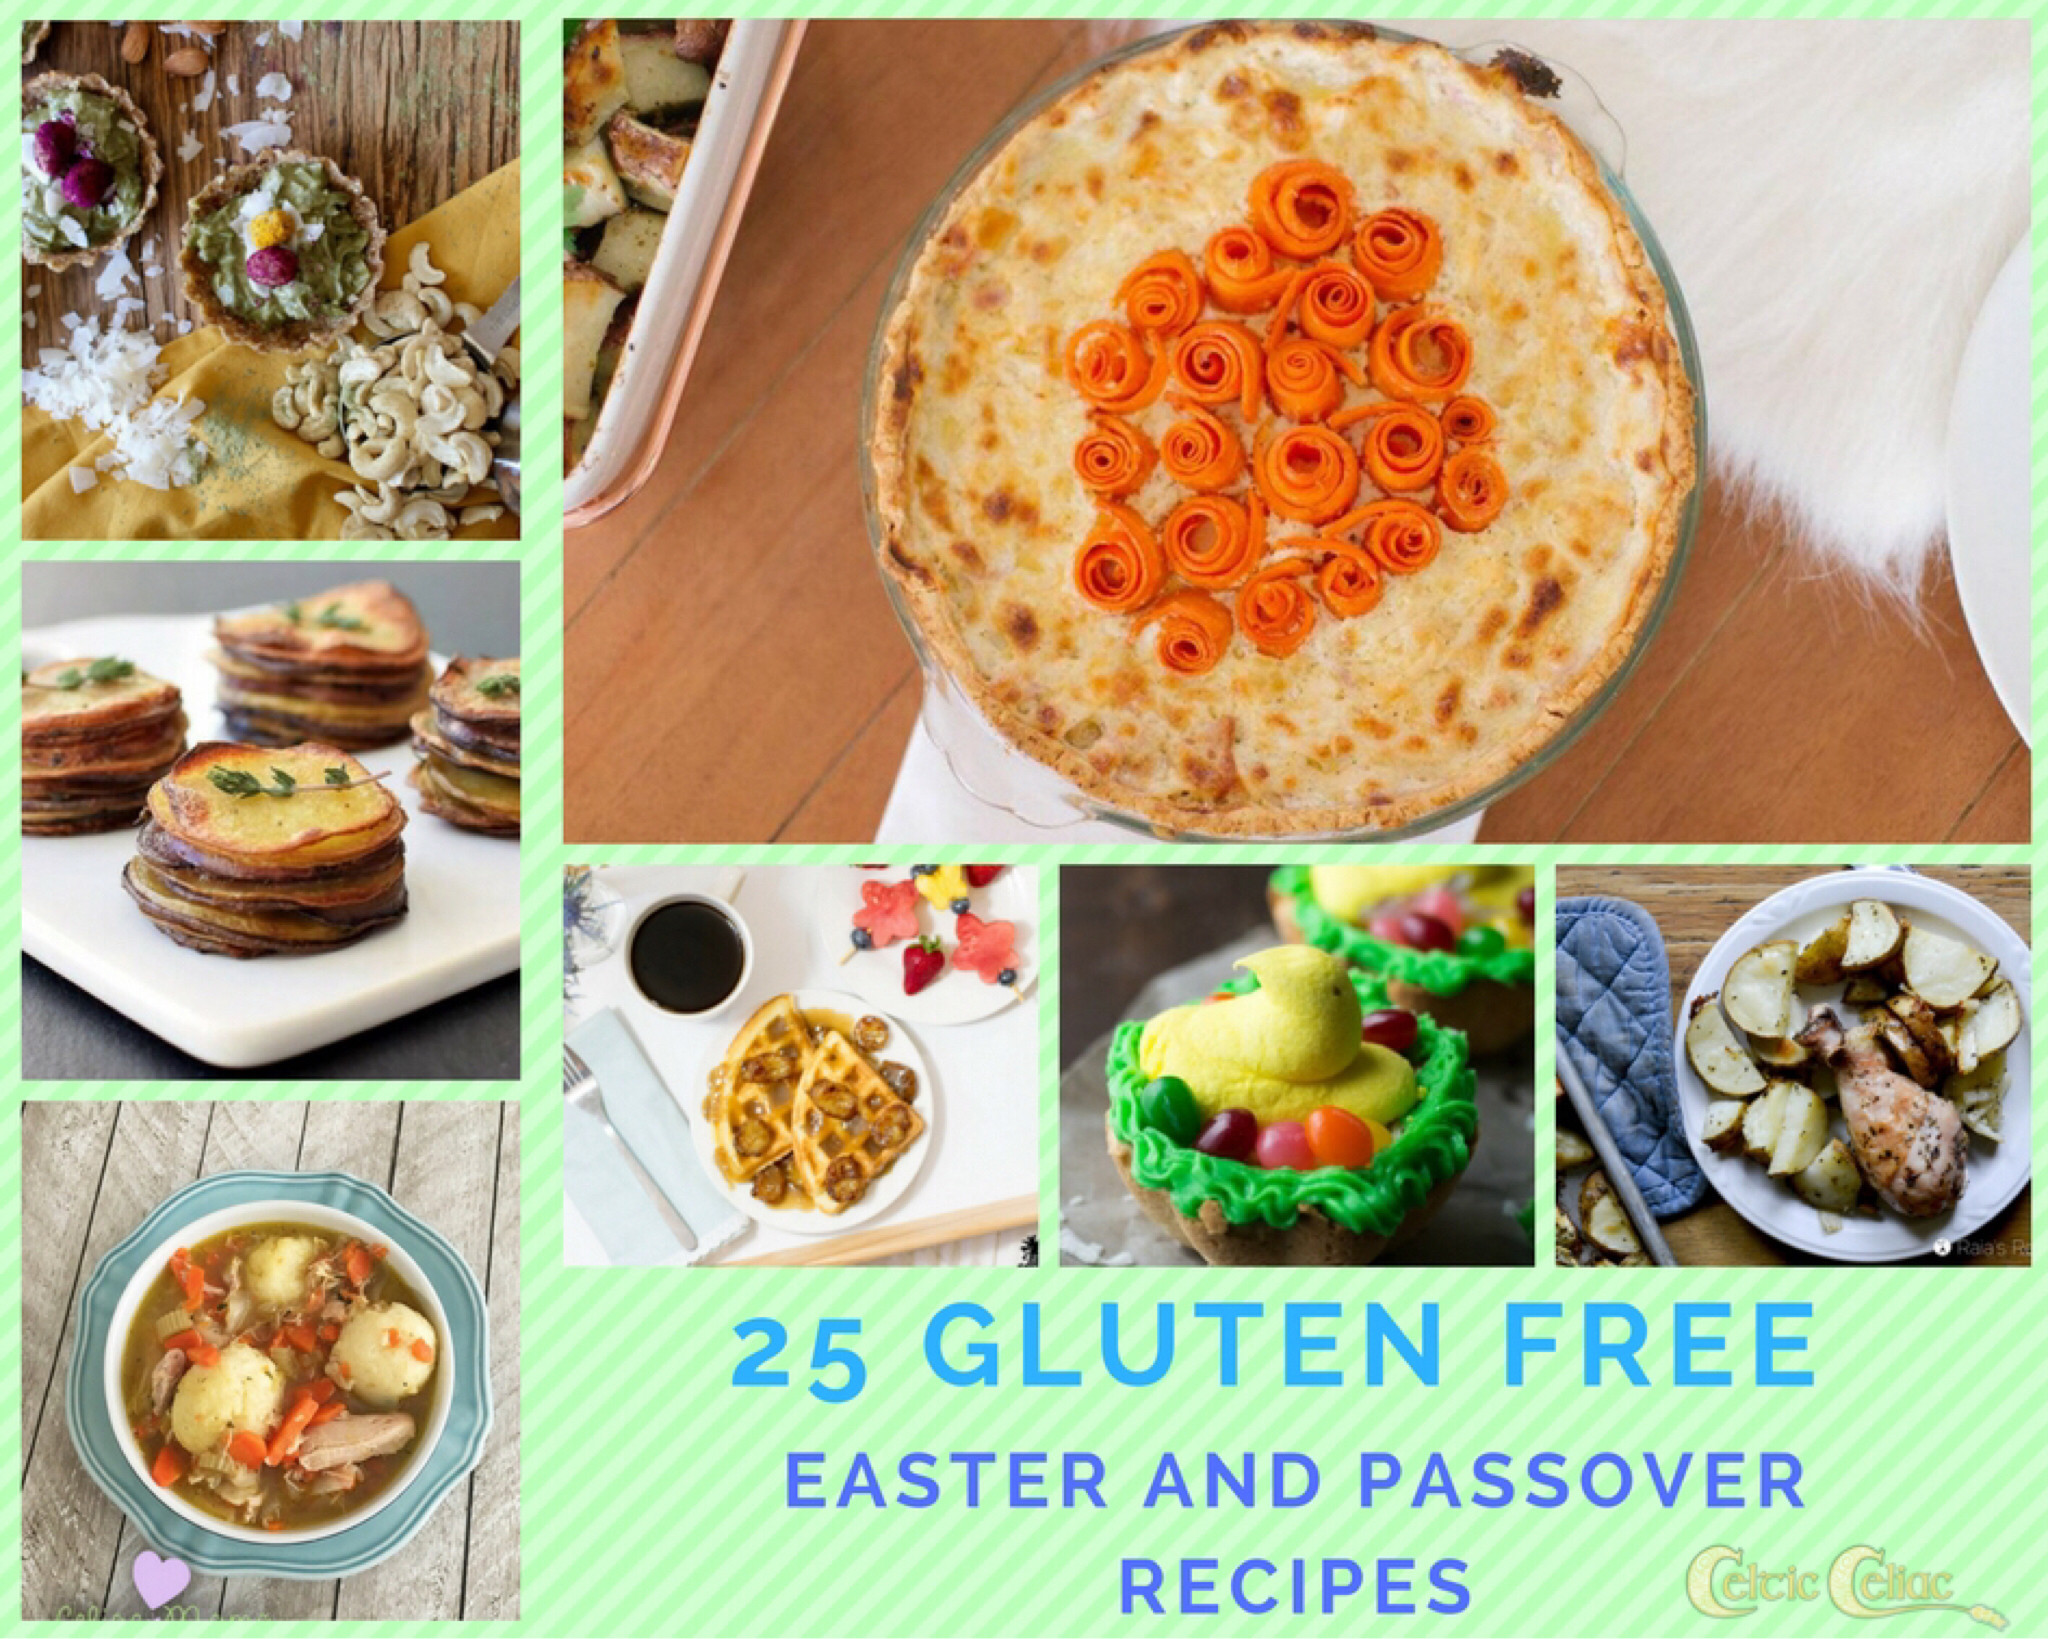 Gluten Free Easter Recipes
 25 Gluten Free Recipes for Easter and Passover